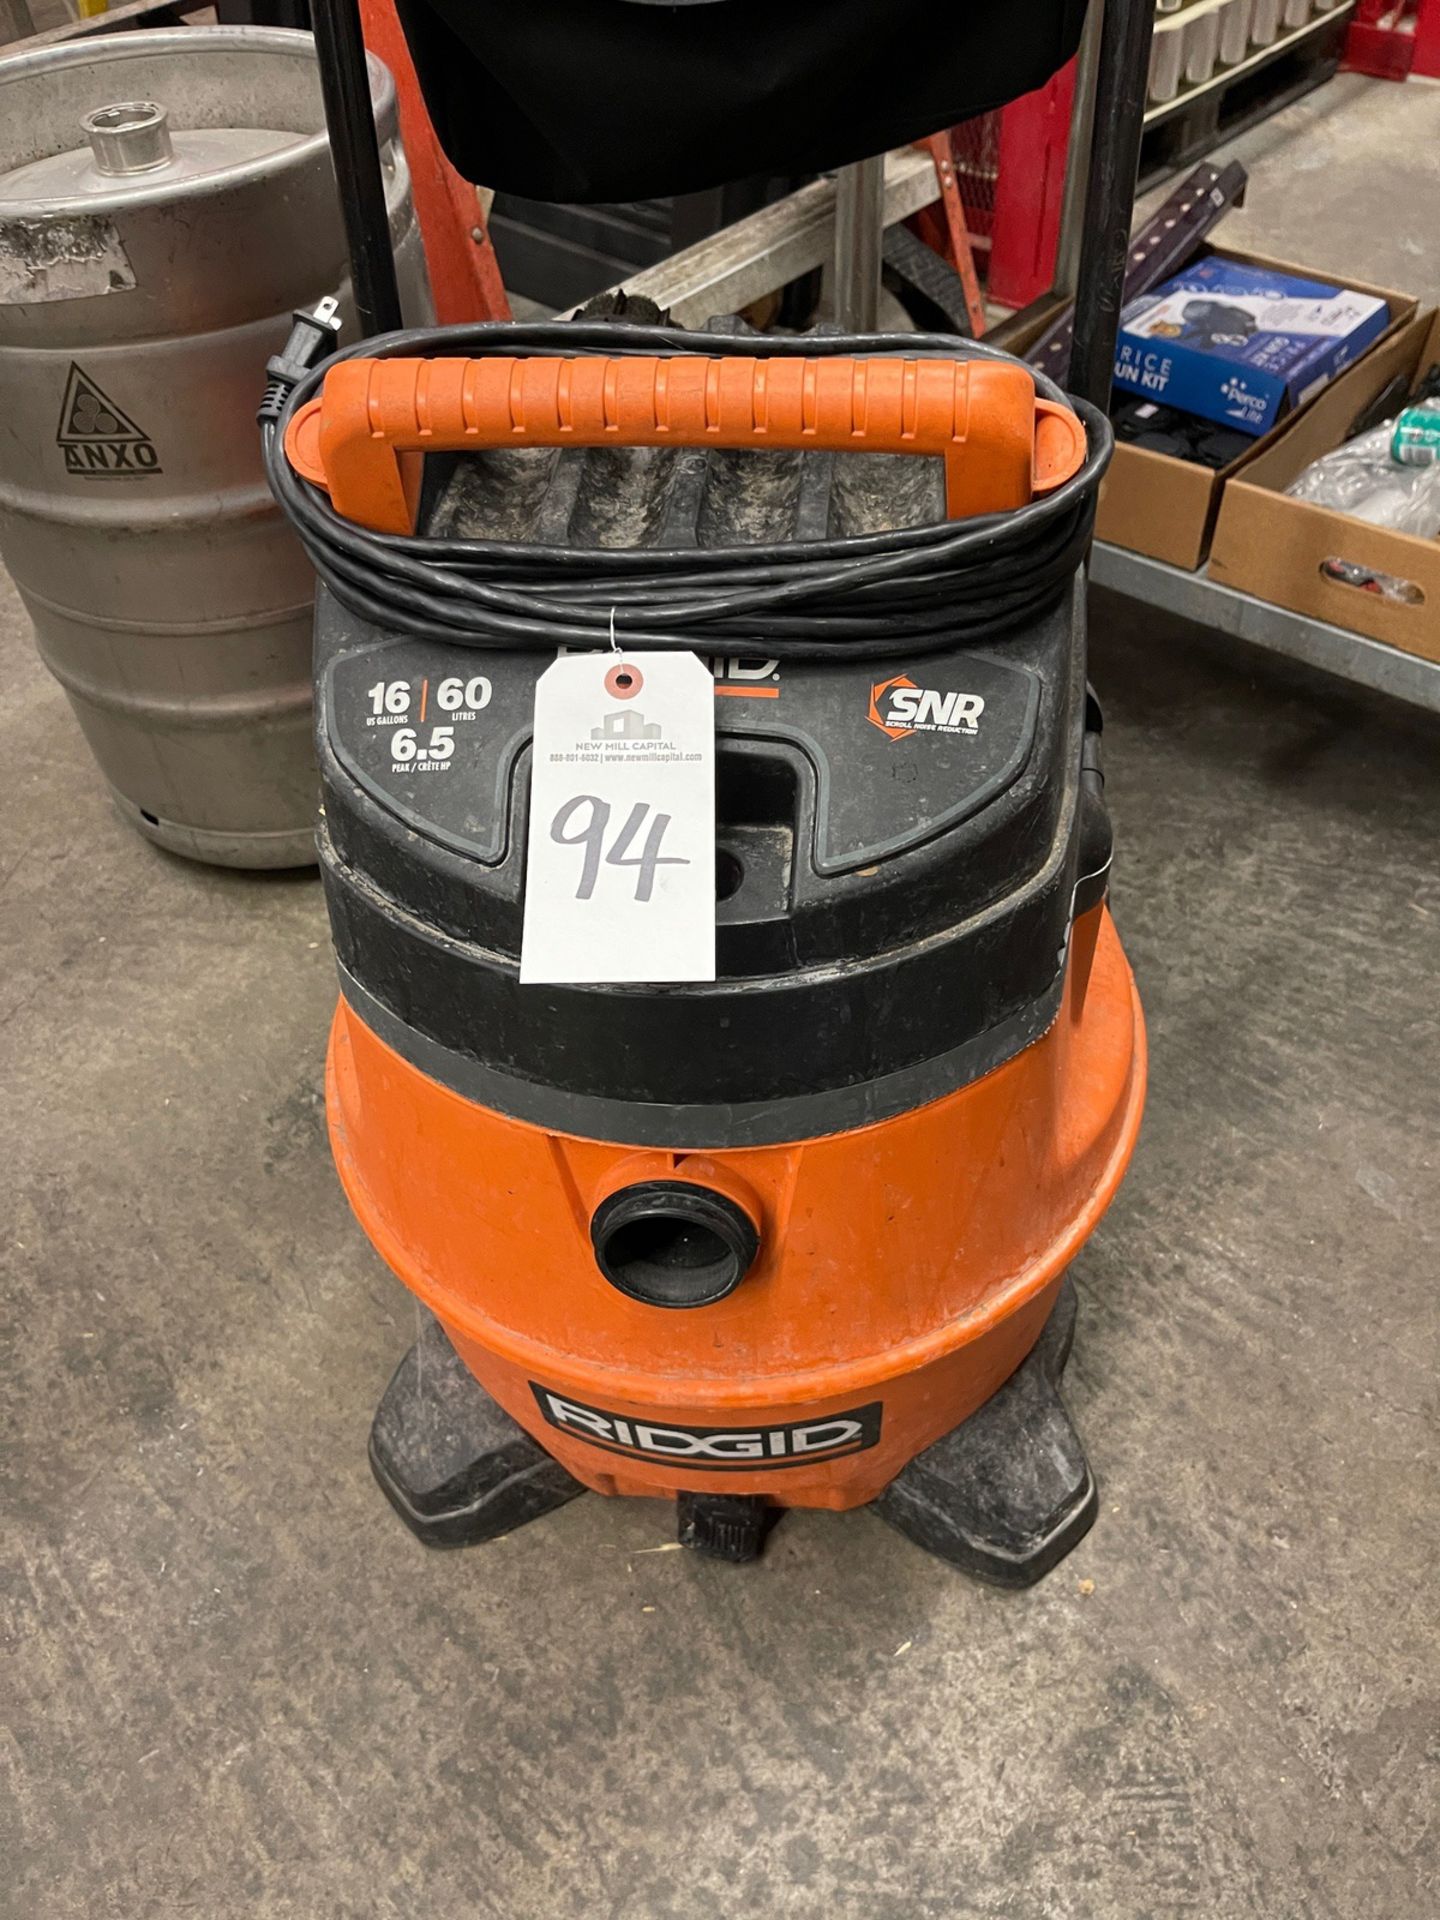 Rigid 6.5 HP, 16 Gallon Shop Vac with Scroll Noise Reduction | Rig Fee $25